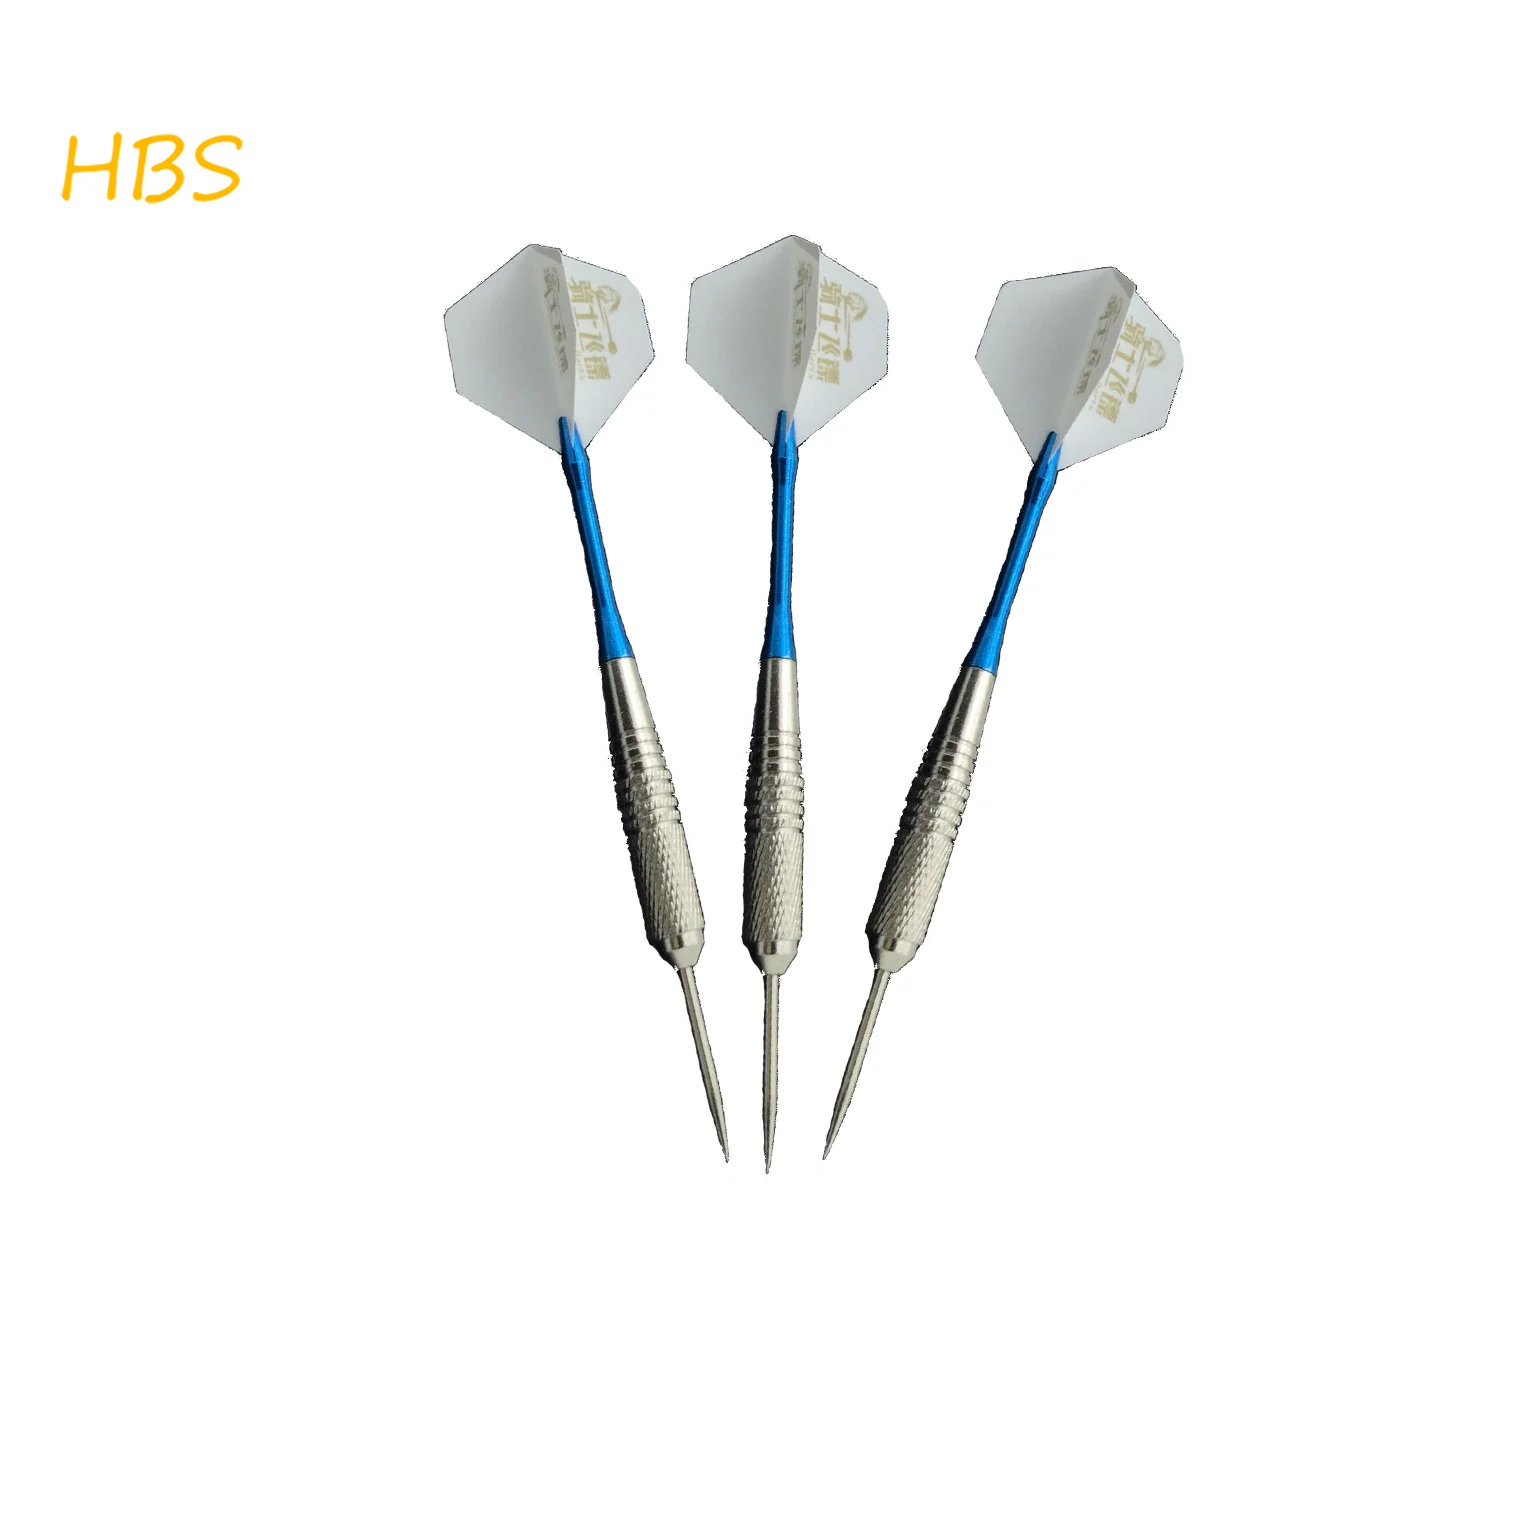 3 PCS 21g Hard Darts Aluminum Alloy Blue Darts Series Indoor Competitive Entertainment Family Party Entertainment deformation ejection big truck 2 1m track folding competitive alloy car large inertial storage container car new year s gift